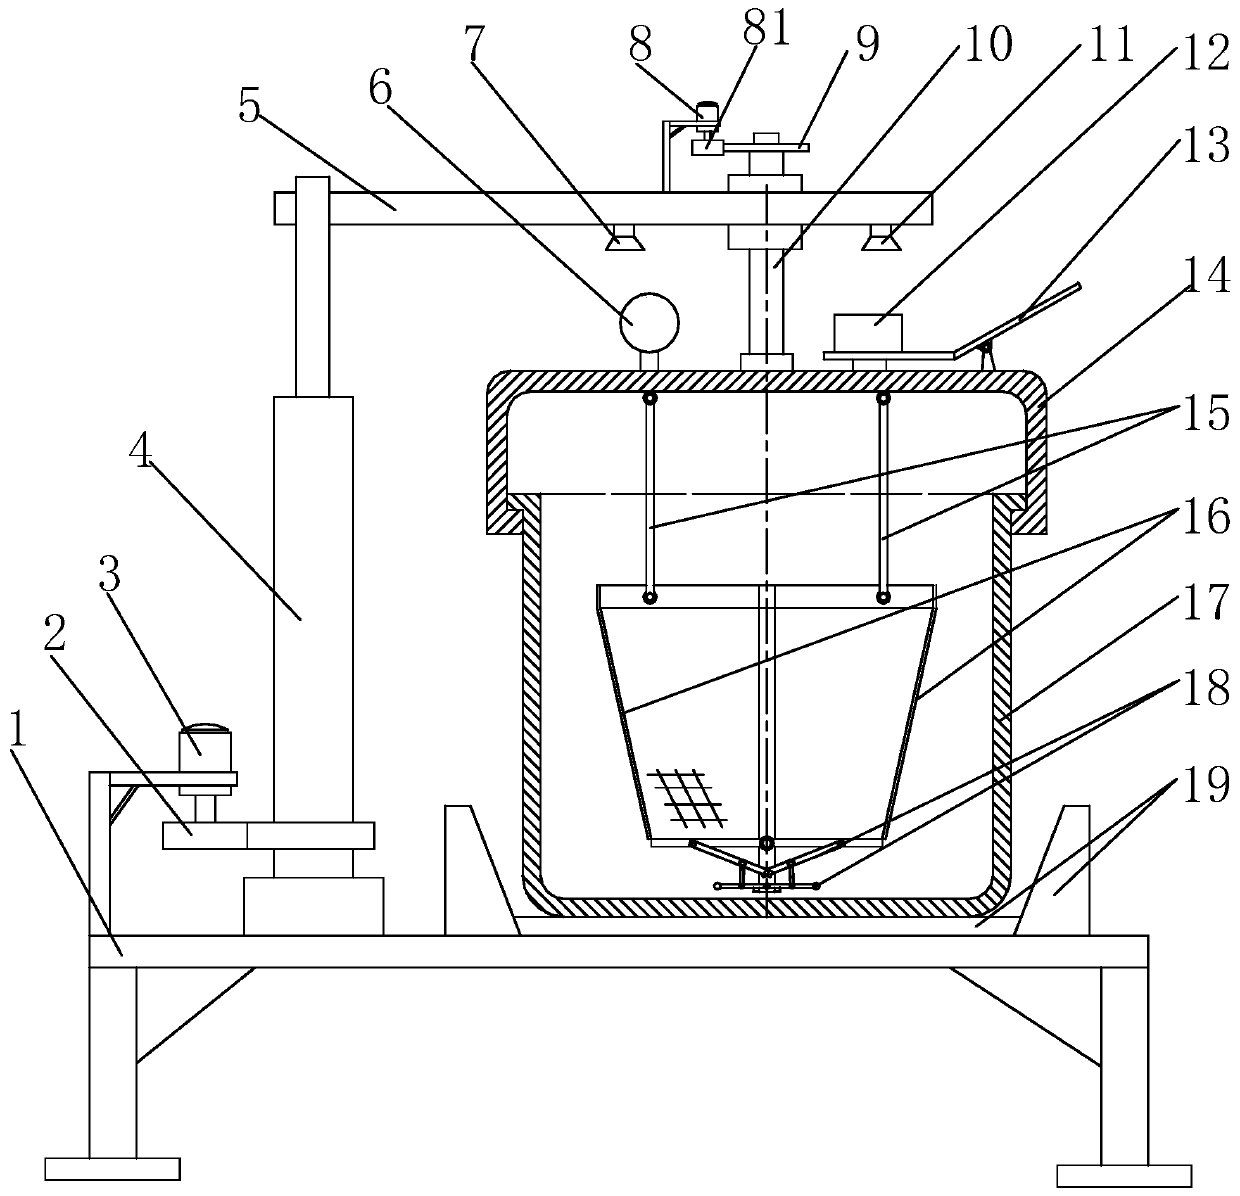 Gap-type high-pressure boiling device for seed nut food